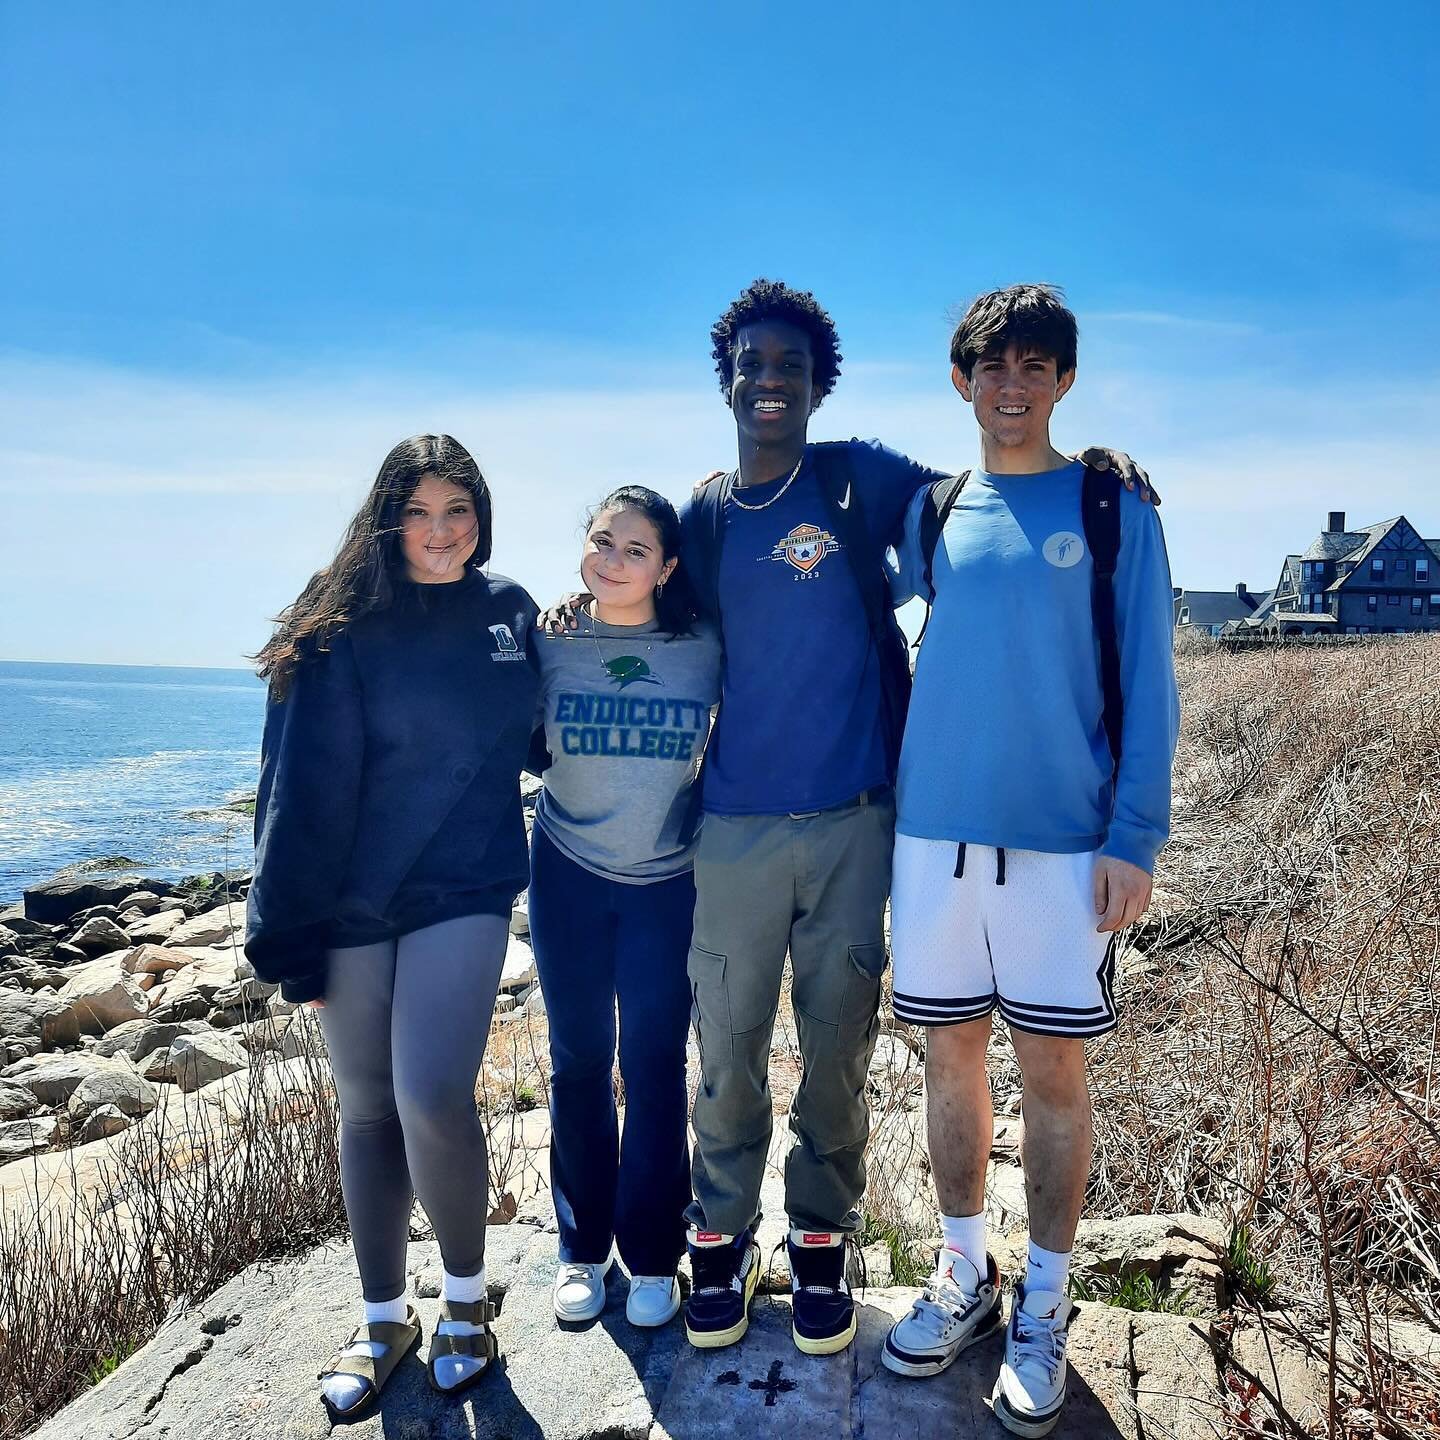 🌞 Embracing the warmth of spring! 🌊 Our Biology and Environmental Science classes are diving into the great outdoors, exploring tide pools, and basking in the fresh ocean air. 🐚🌿 Nothing beats this hands-on, immersive learning experience! #Outdoo